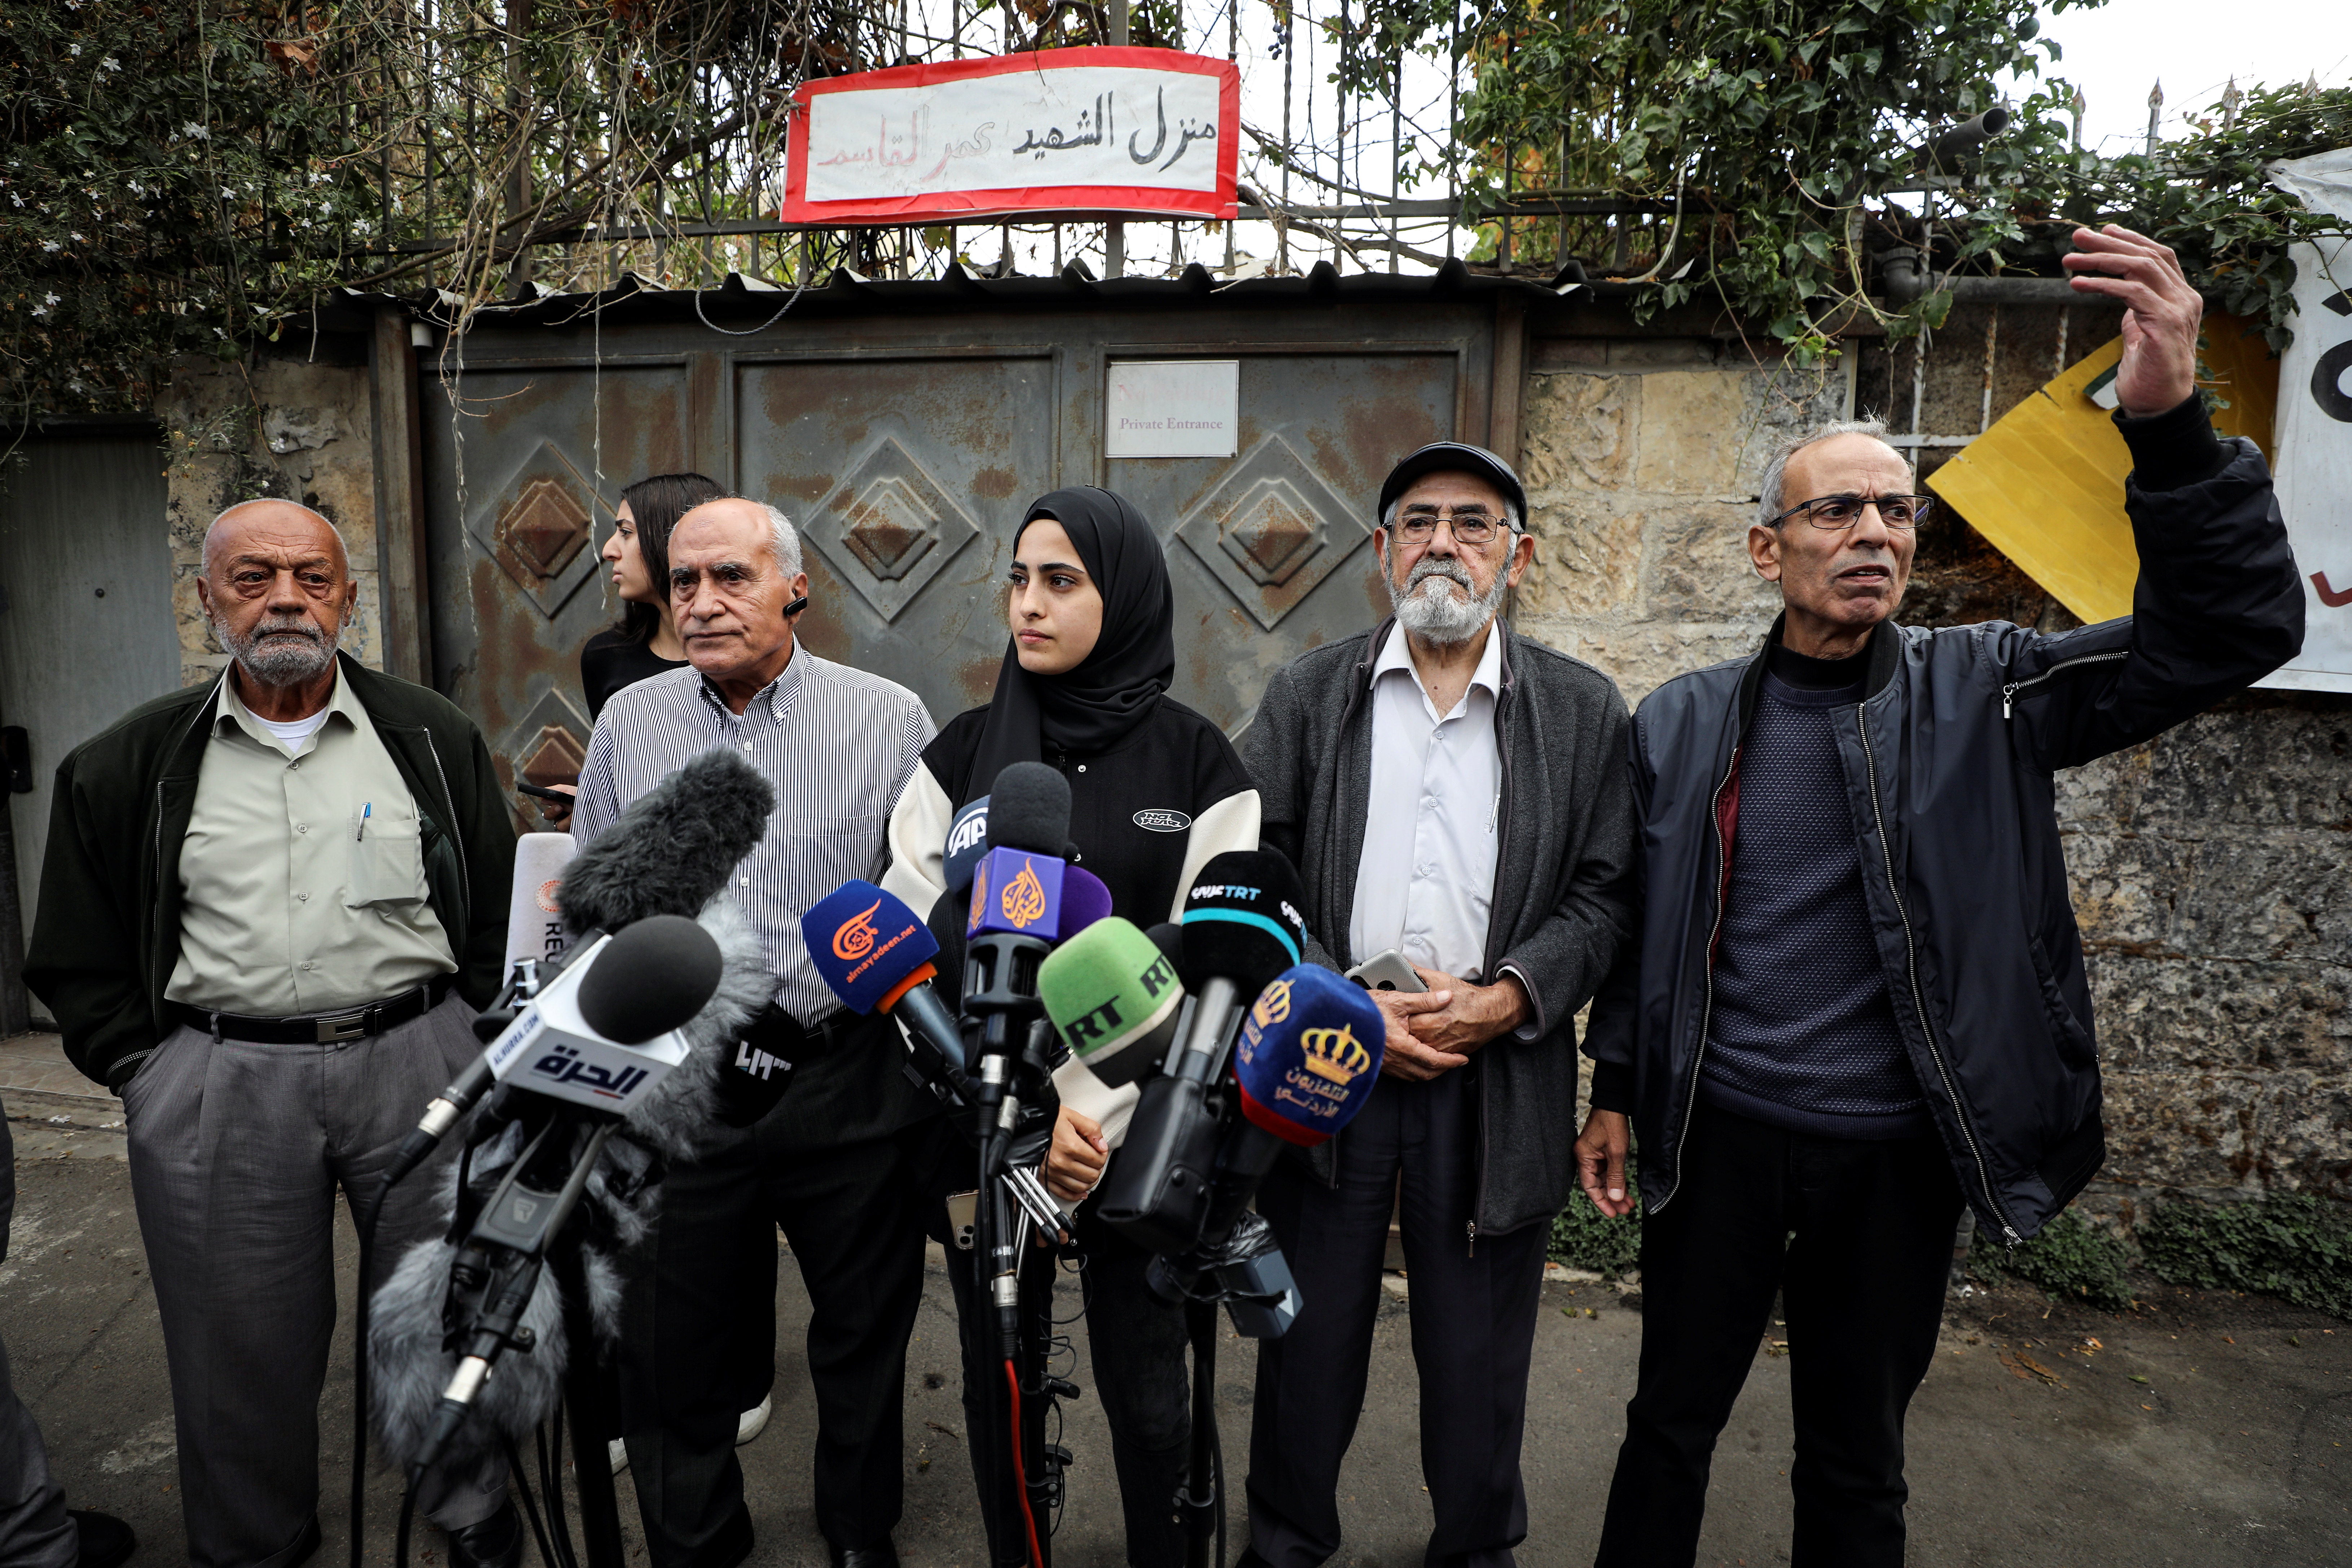 Palestinian activist Muna El-Kurd stands with her family members at a media conference in the East Jerusalem neighbourhood of Sheikh Jarrah November 2, 2021. REUTERS/Ammar Awad